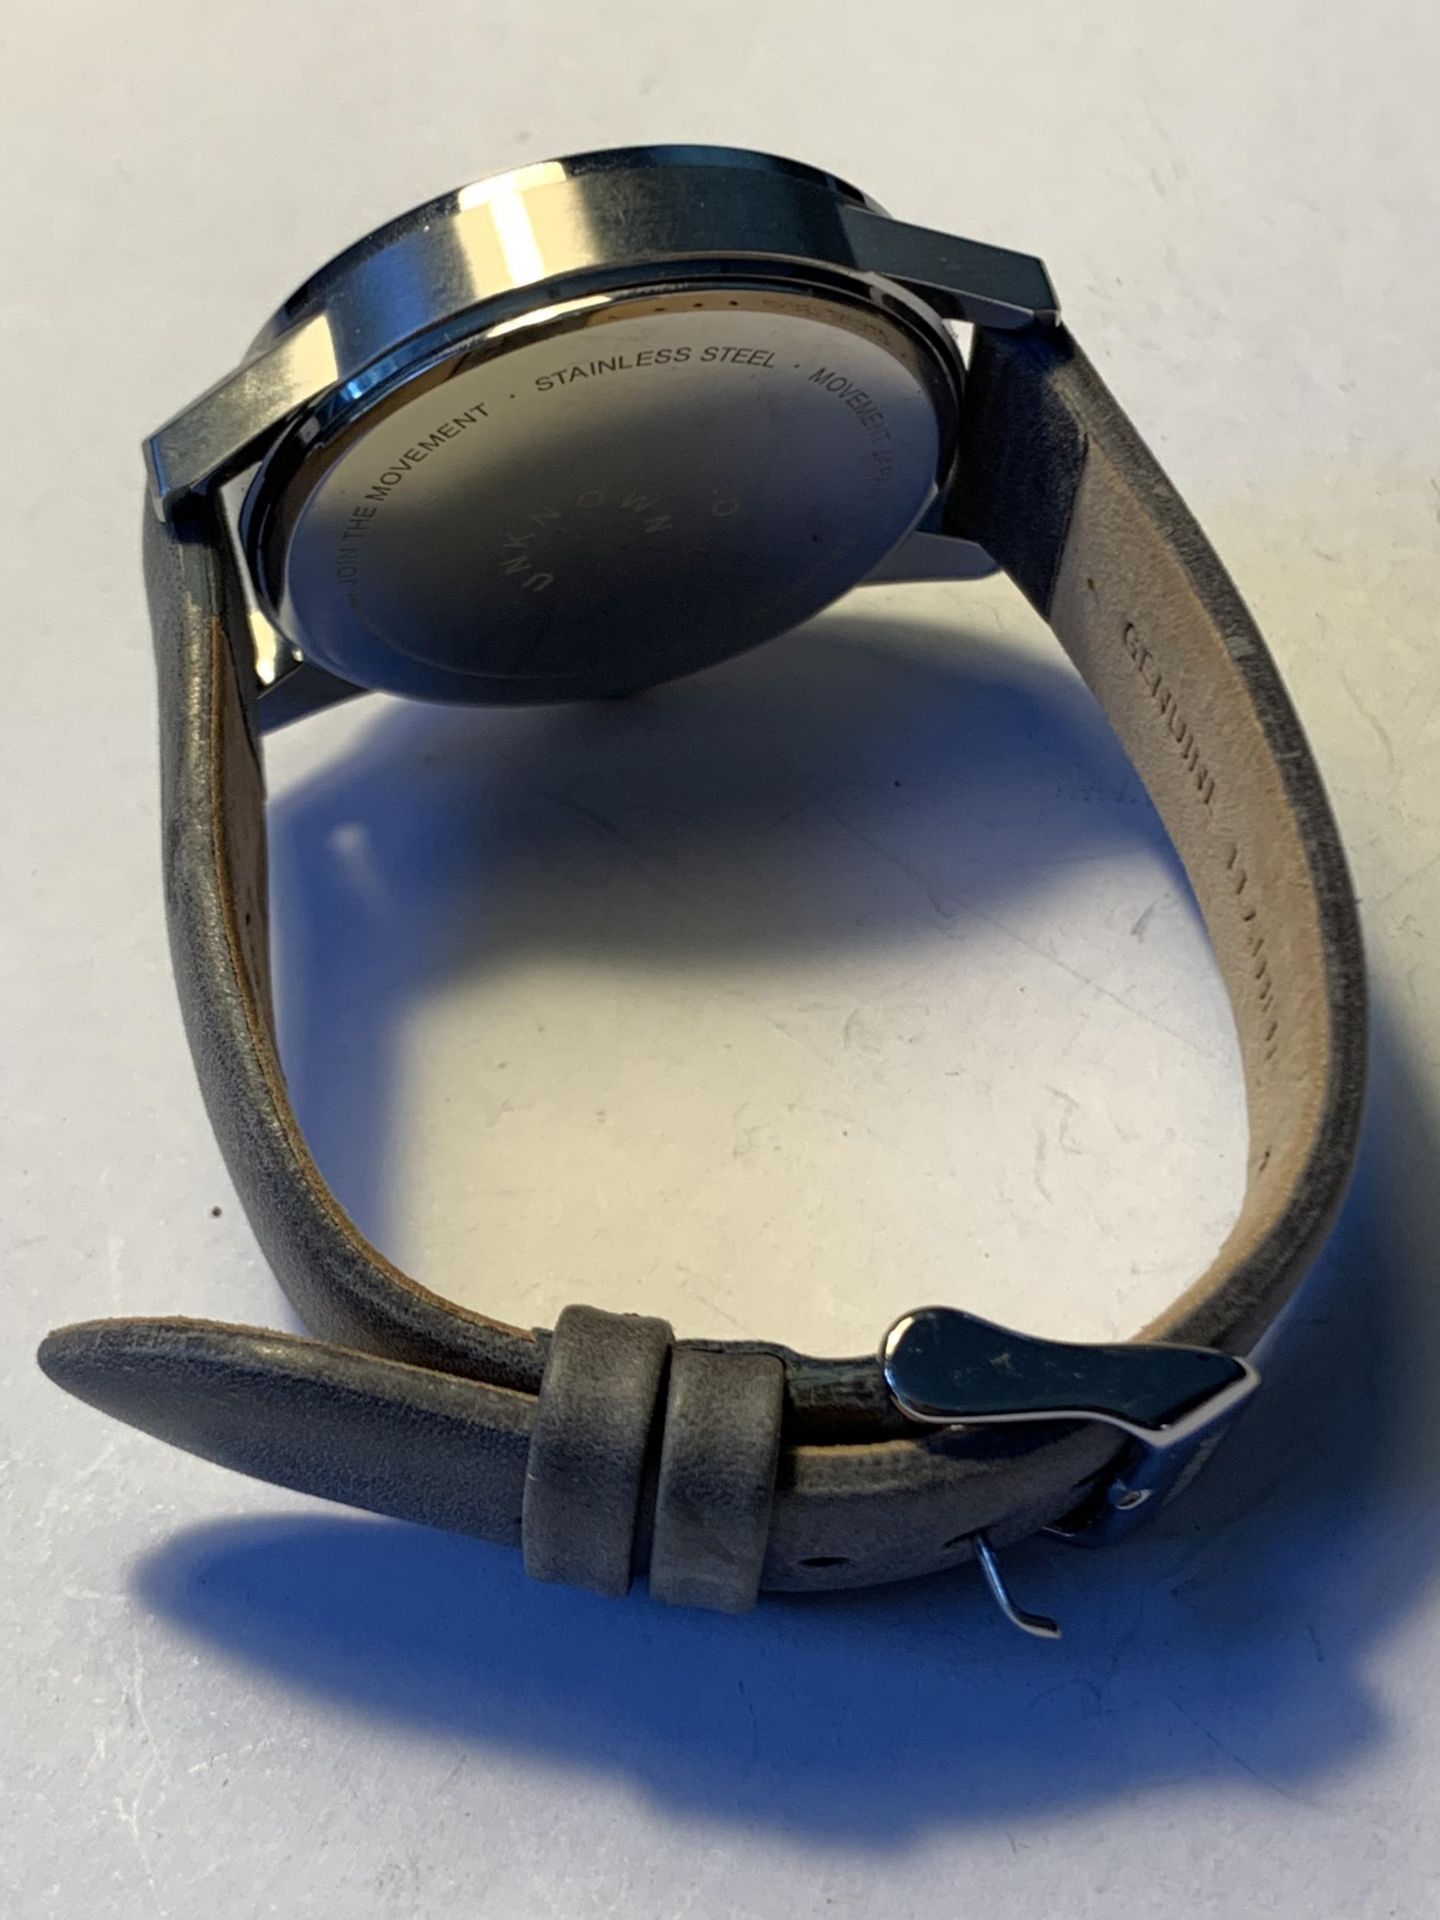 AN UNKNOWN WRISTWATCH SEEN WORKING BUT NO WARRANTY - Image 3 of 3